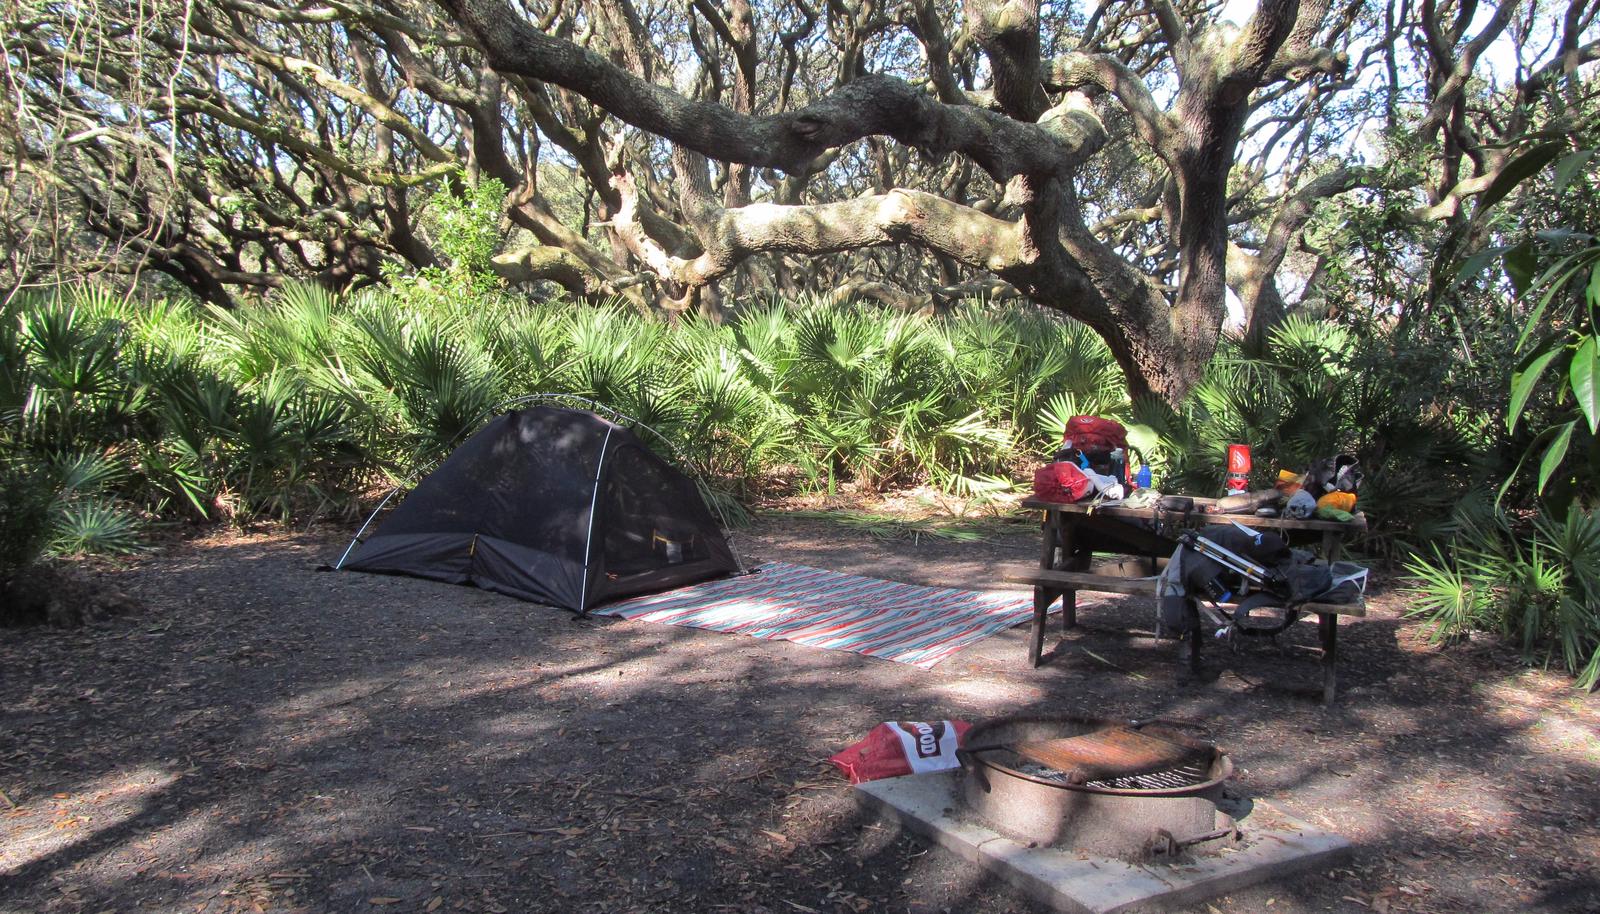 campsite with picnic table, food cage, and fire ring under live oak treesSea Camp site 10